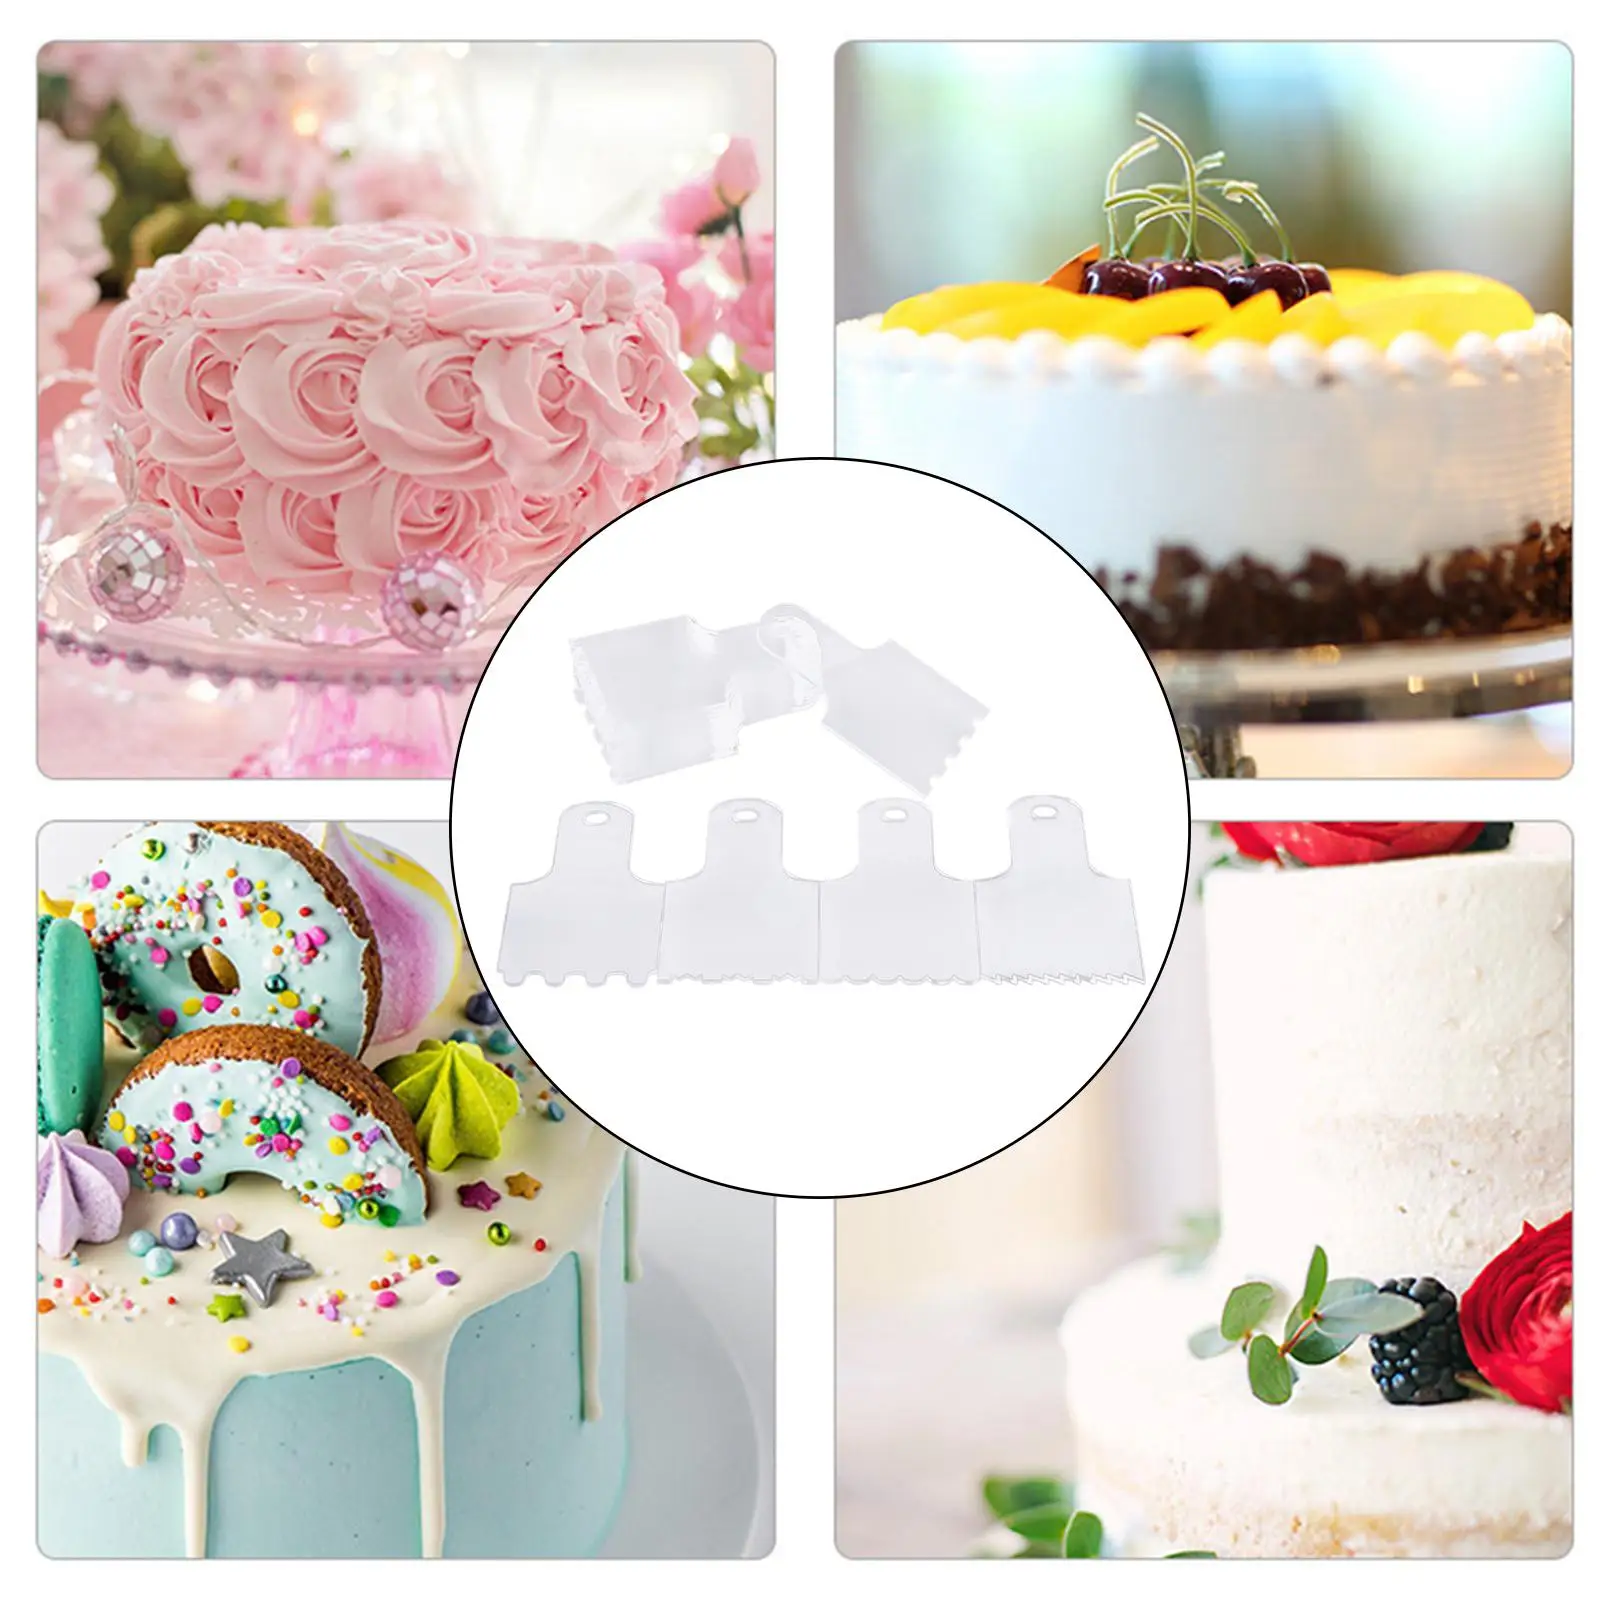 20x Cake Scraper Decorating Tool Supplies Icing for Kitchen Wedding